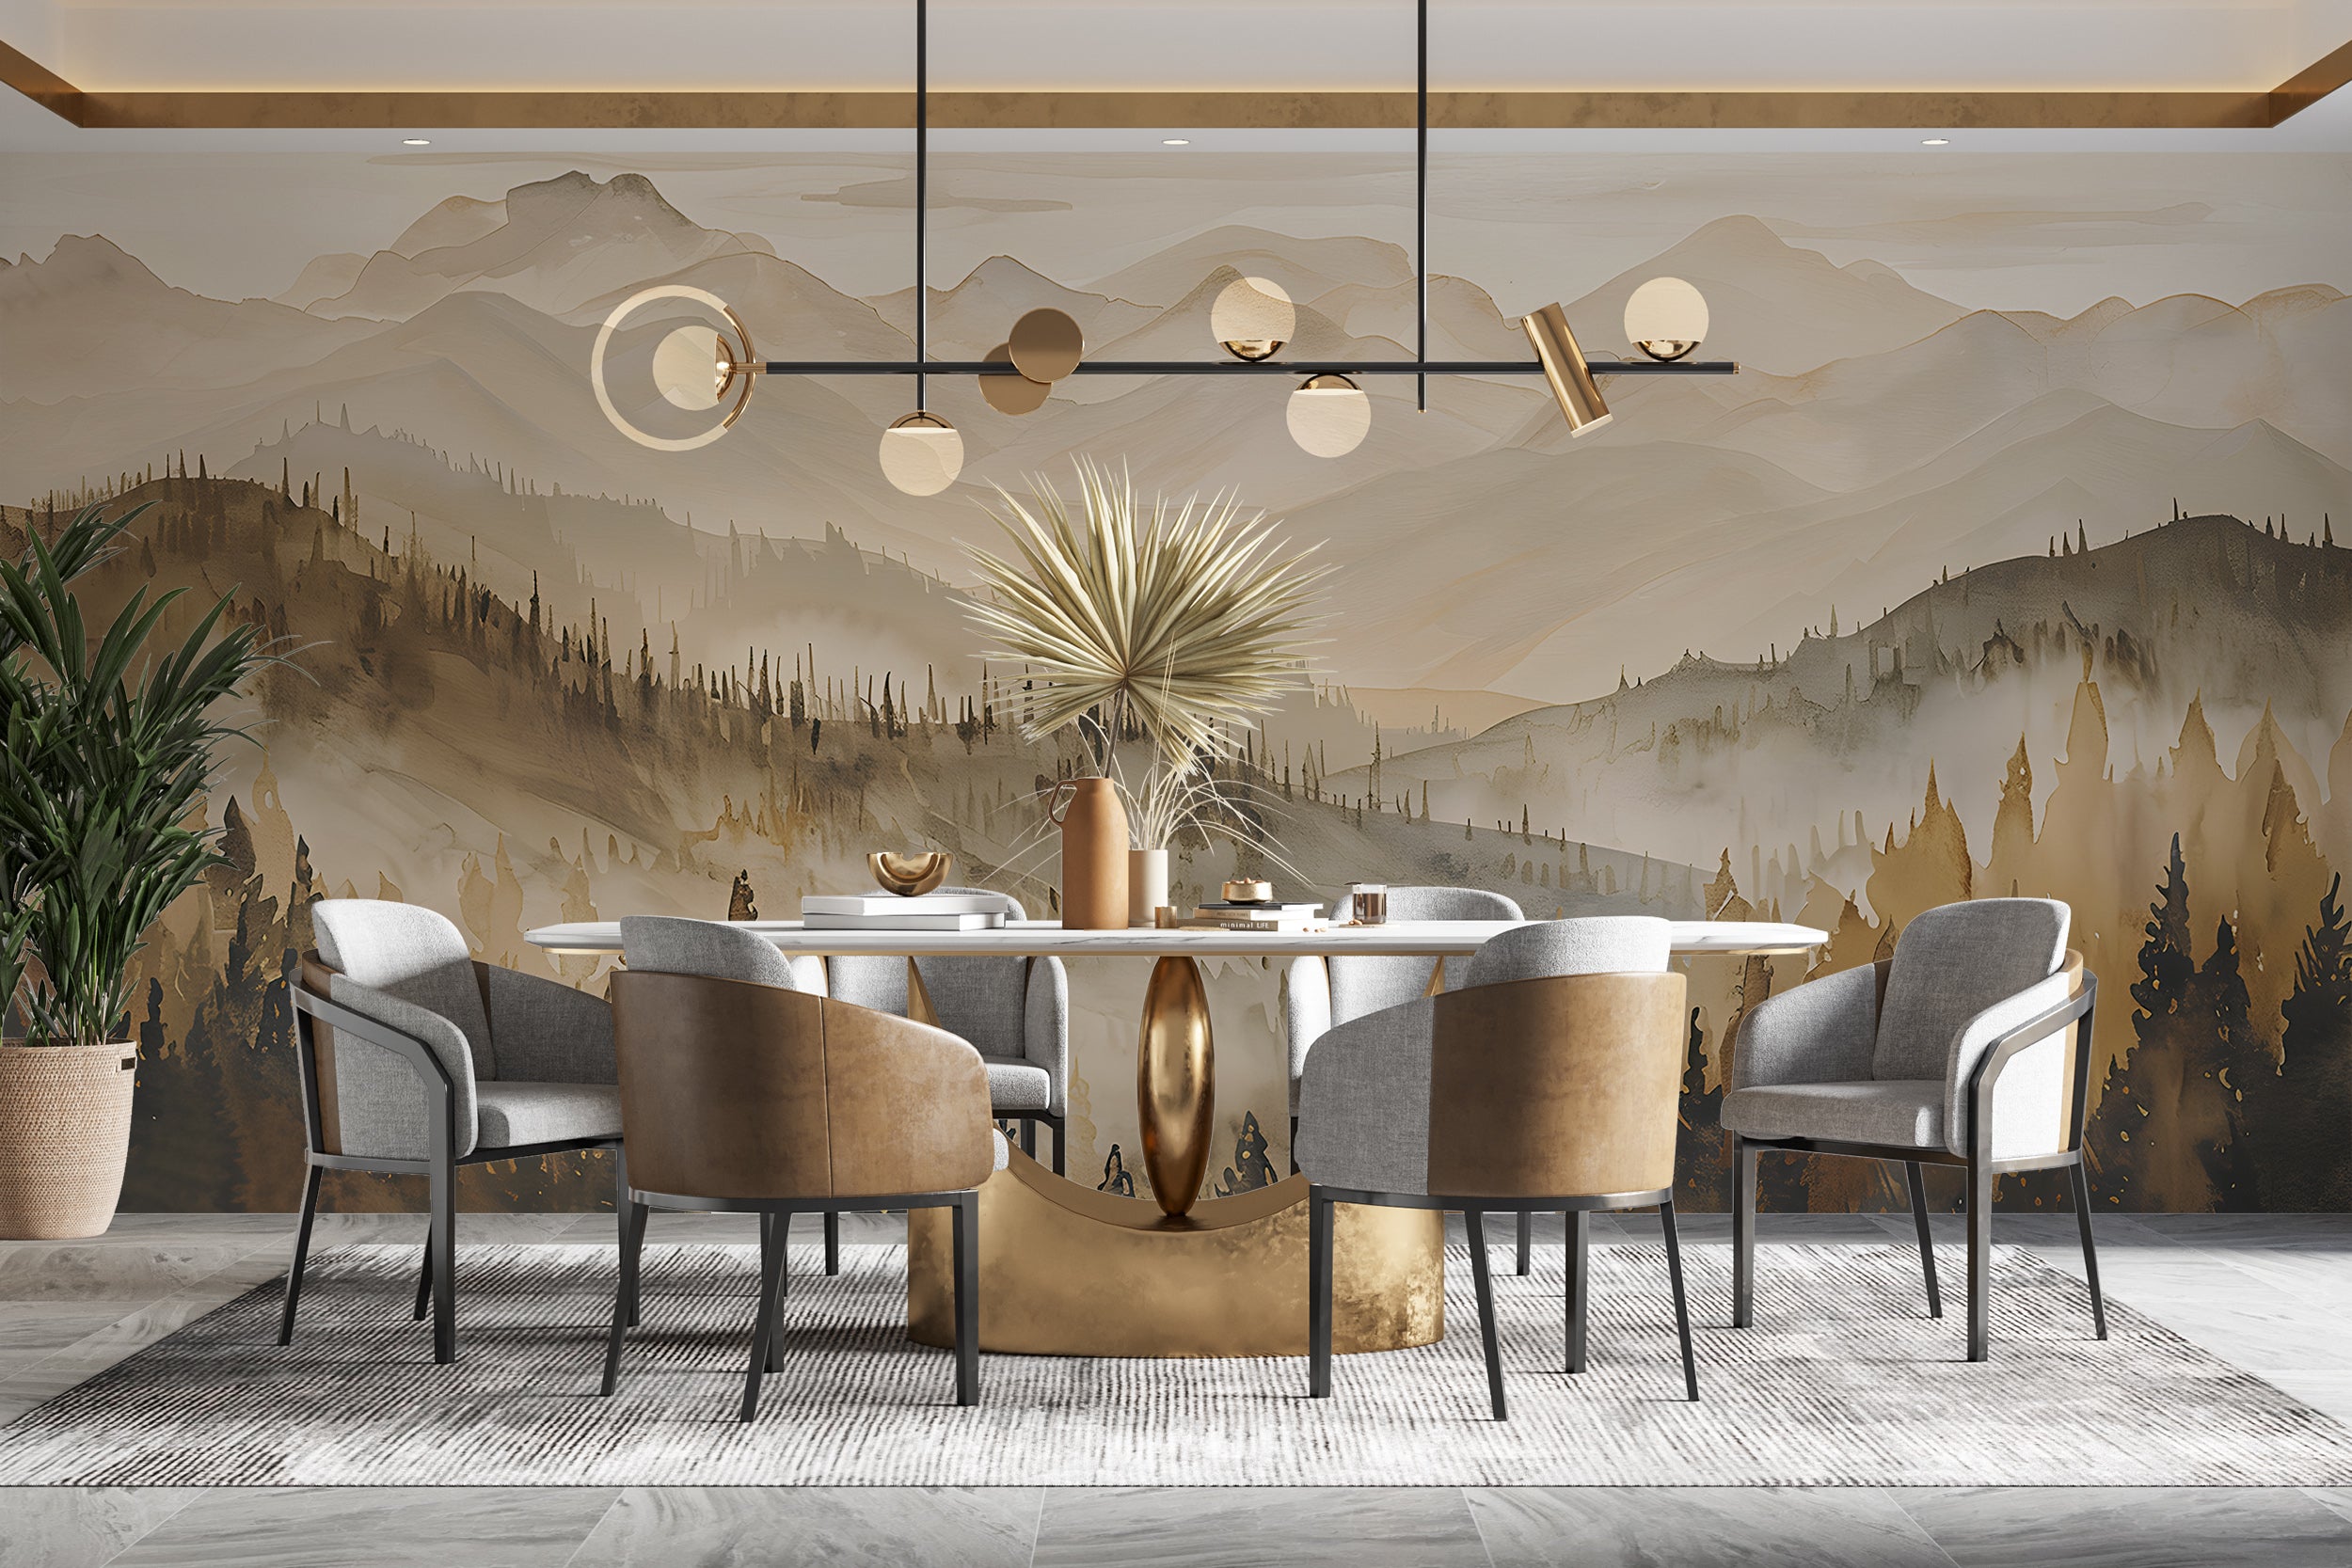 Brown and Beige Landscape Mural, Watercolor Mountains and Forest, Peel & Stick Nature Wall Decal, Removable Beige Pine Tree Forest